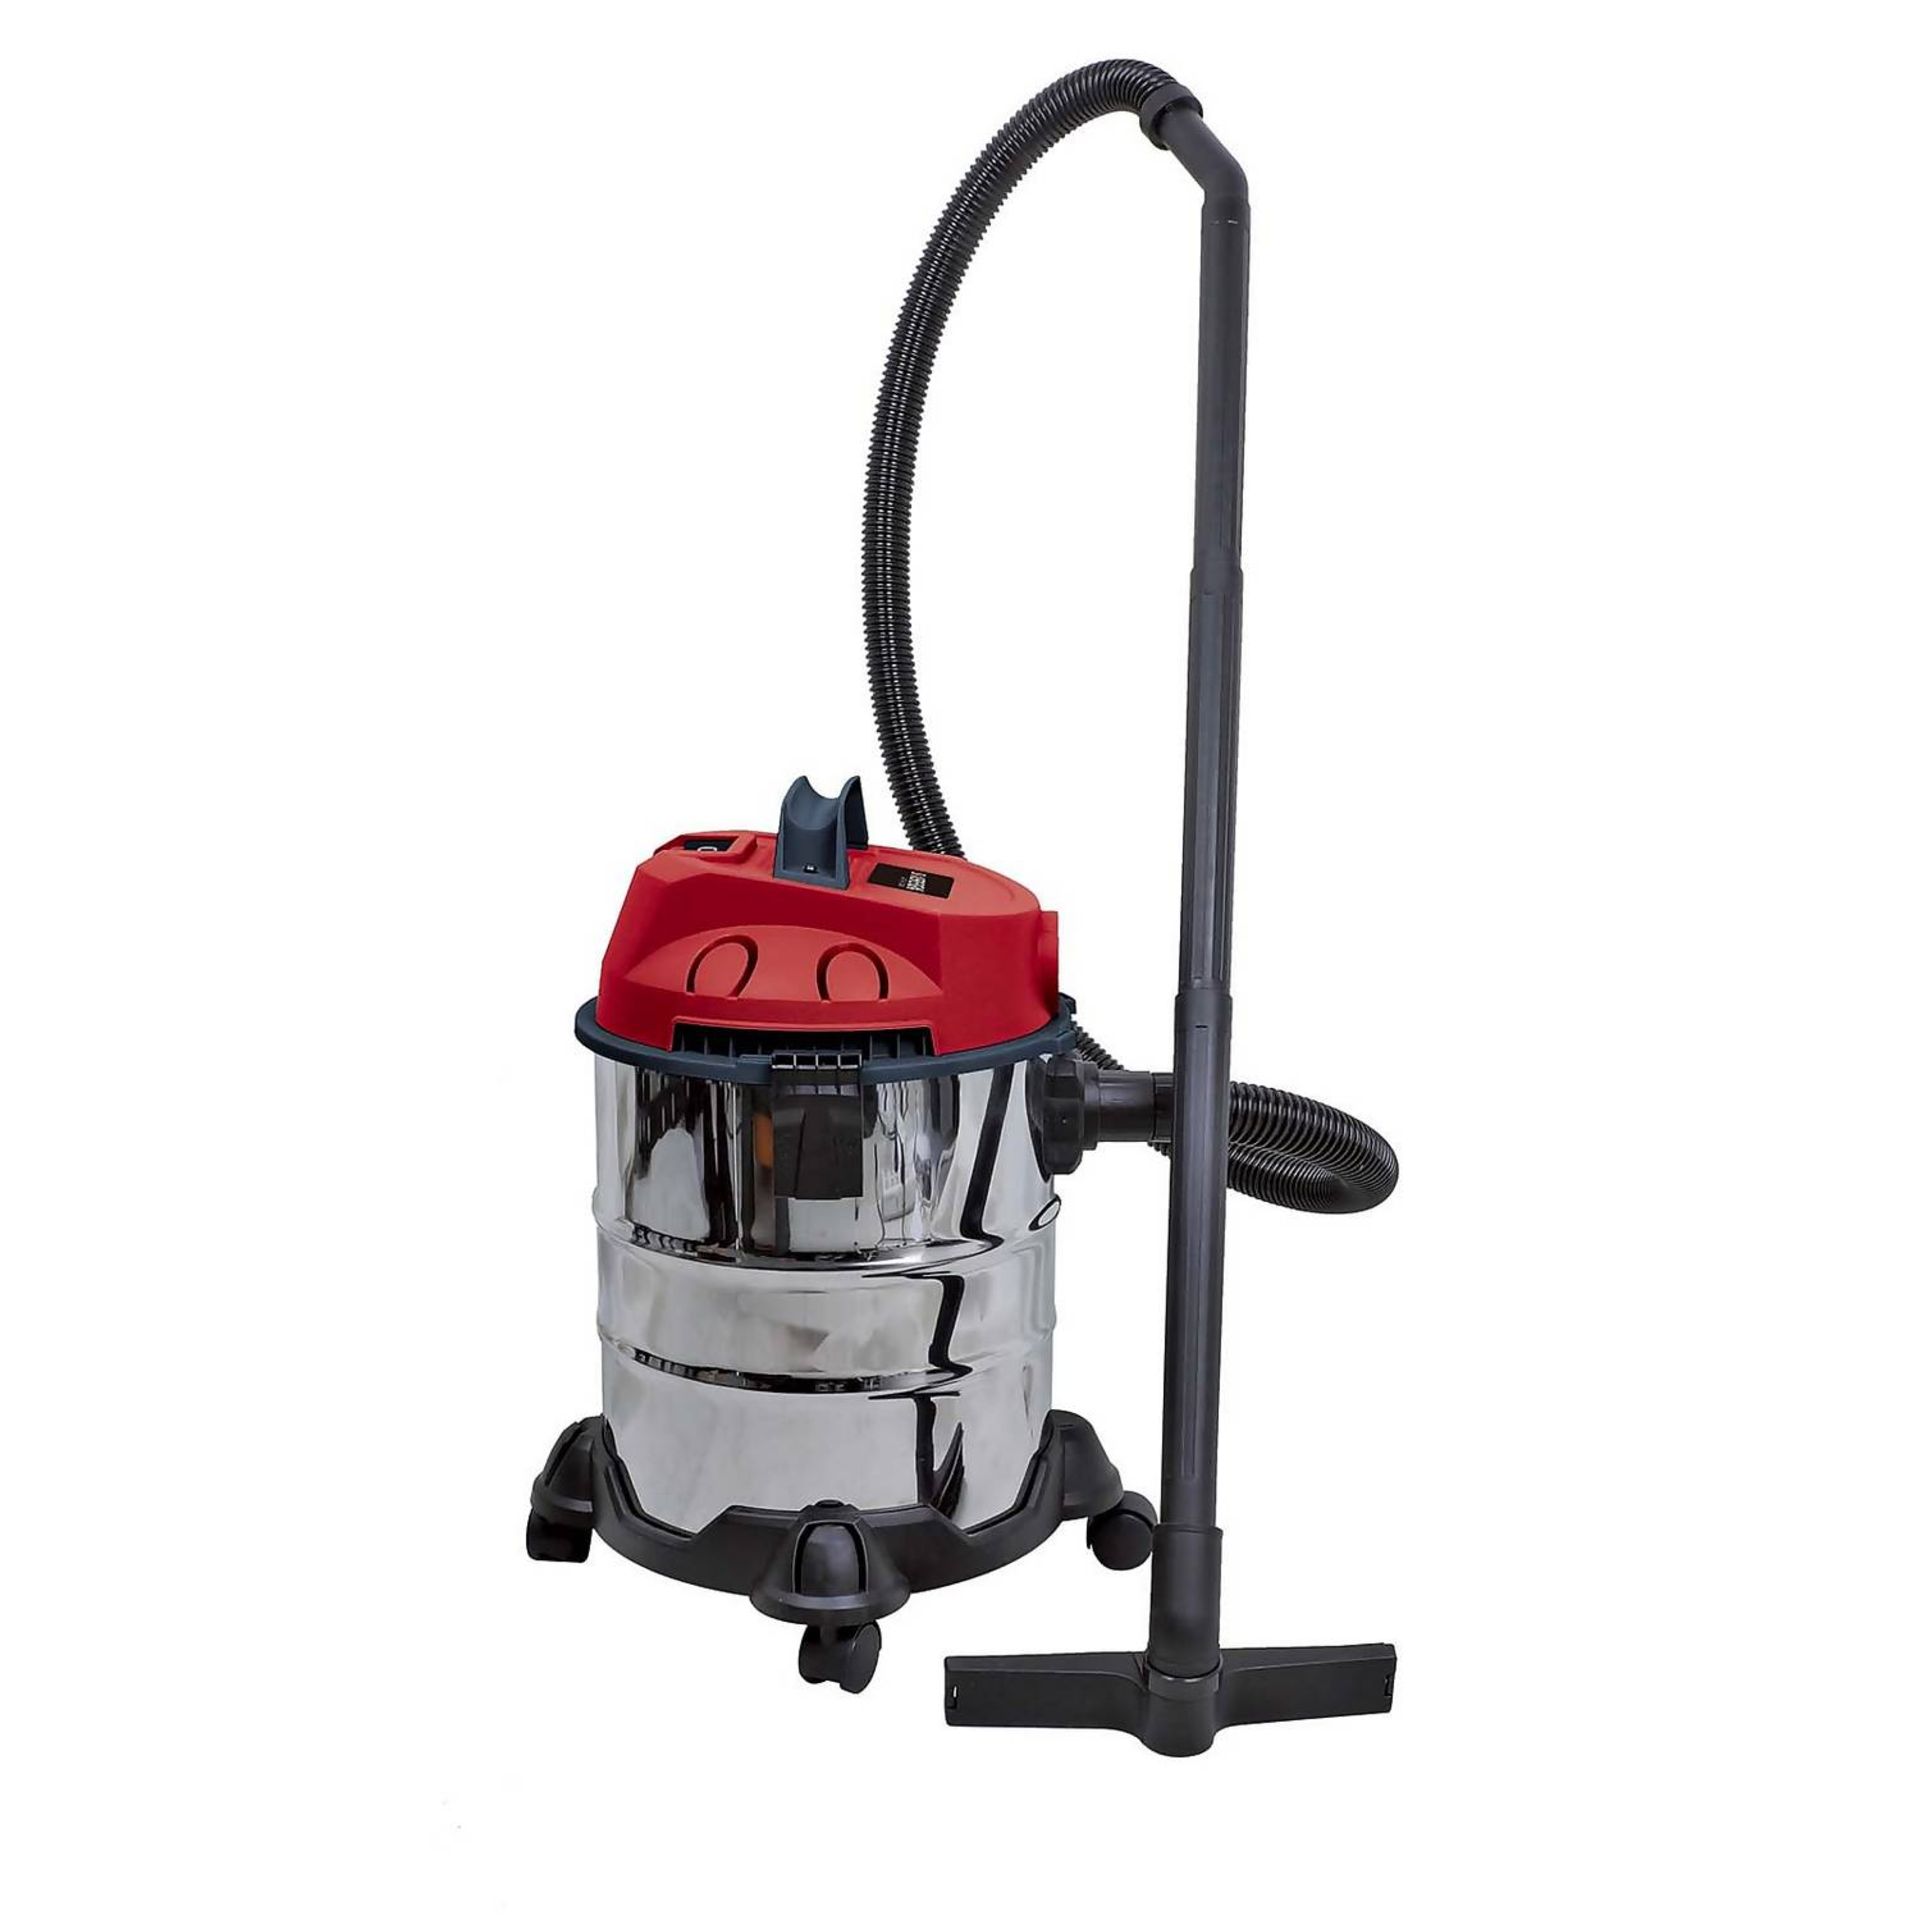 (7M) 3x Itrems. 1x Sovereign 1400W Electric Pressure Washer. 1x Soverreign 1400W Wet & Dry Vacuum C - Image 2 of 4